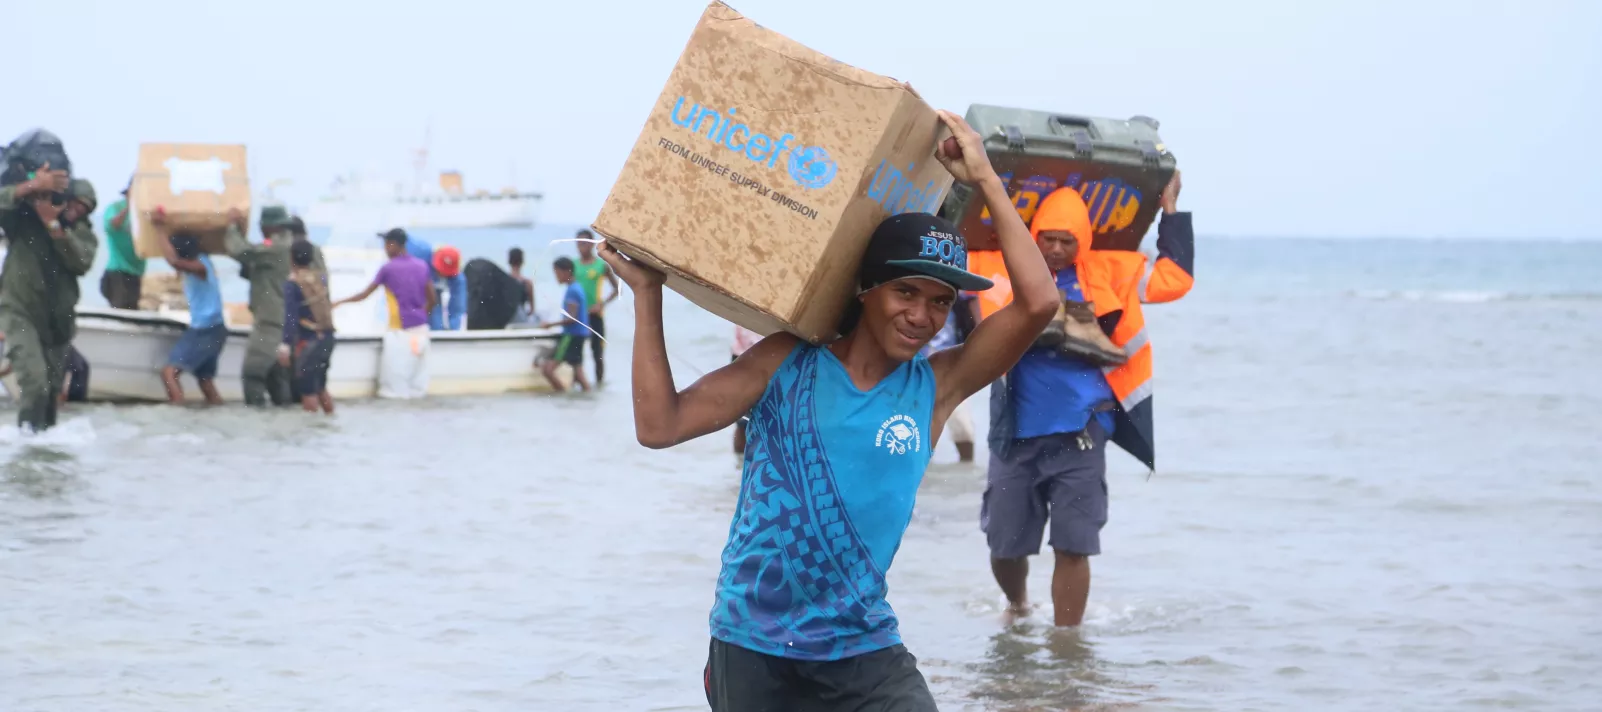 Delivering WASH supplies to communities affected by Cyclone Winston on Koro Island